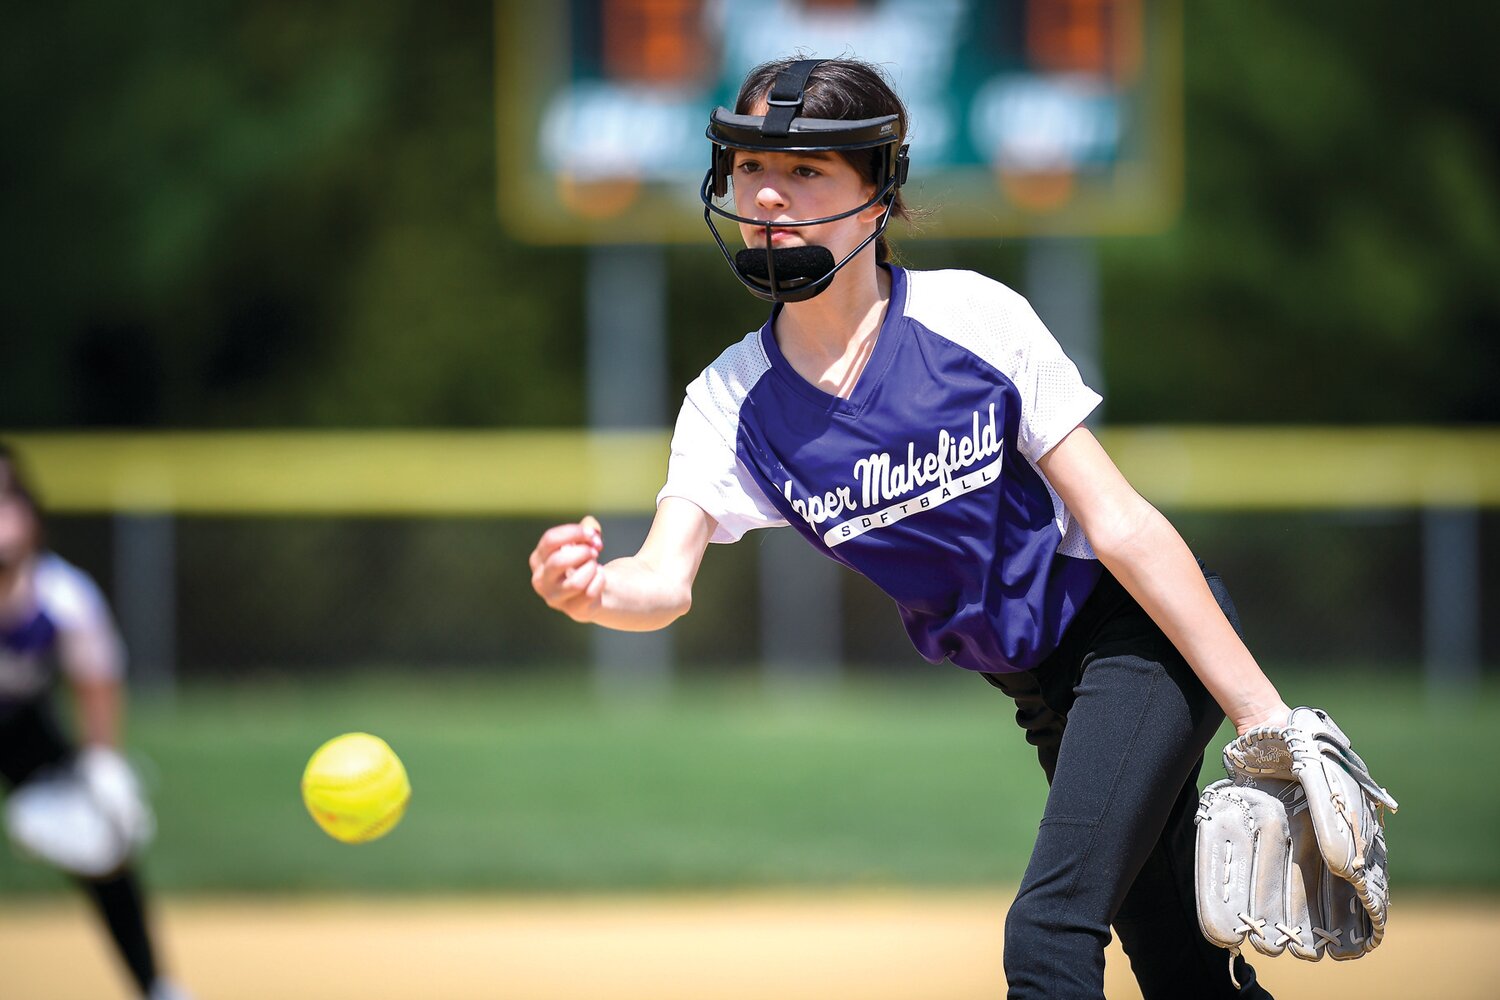 Molly Dzieken, 10, delivers a pitch on Opening Day.